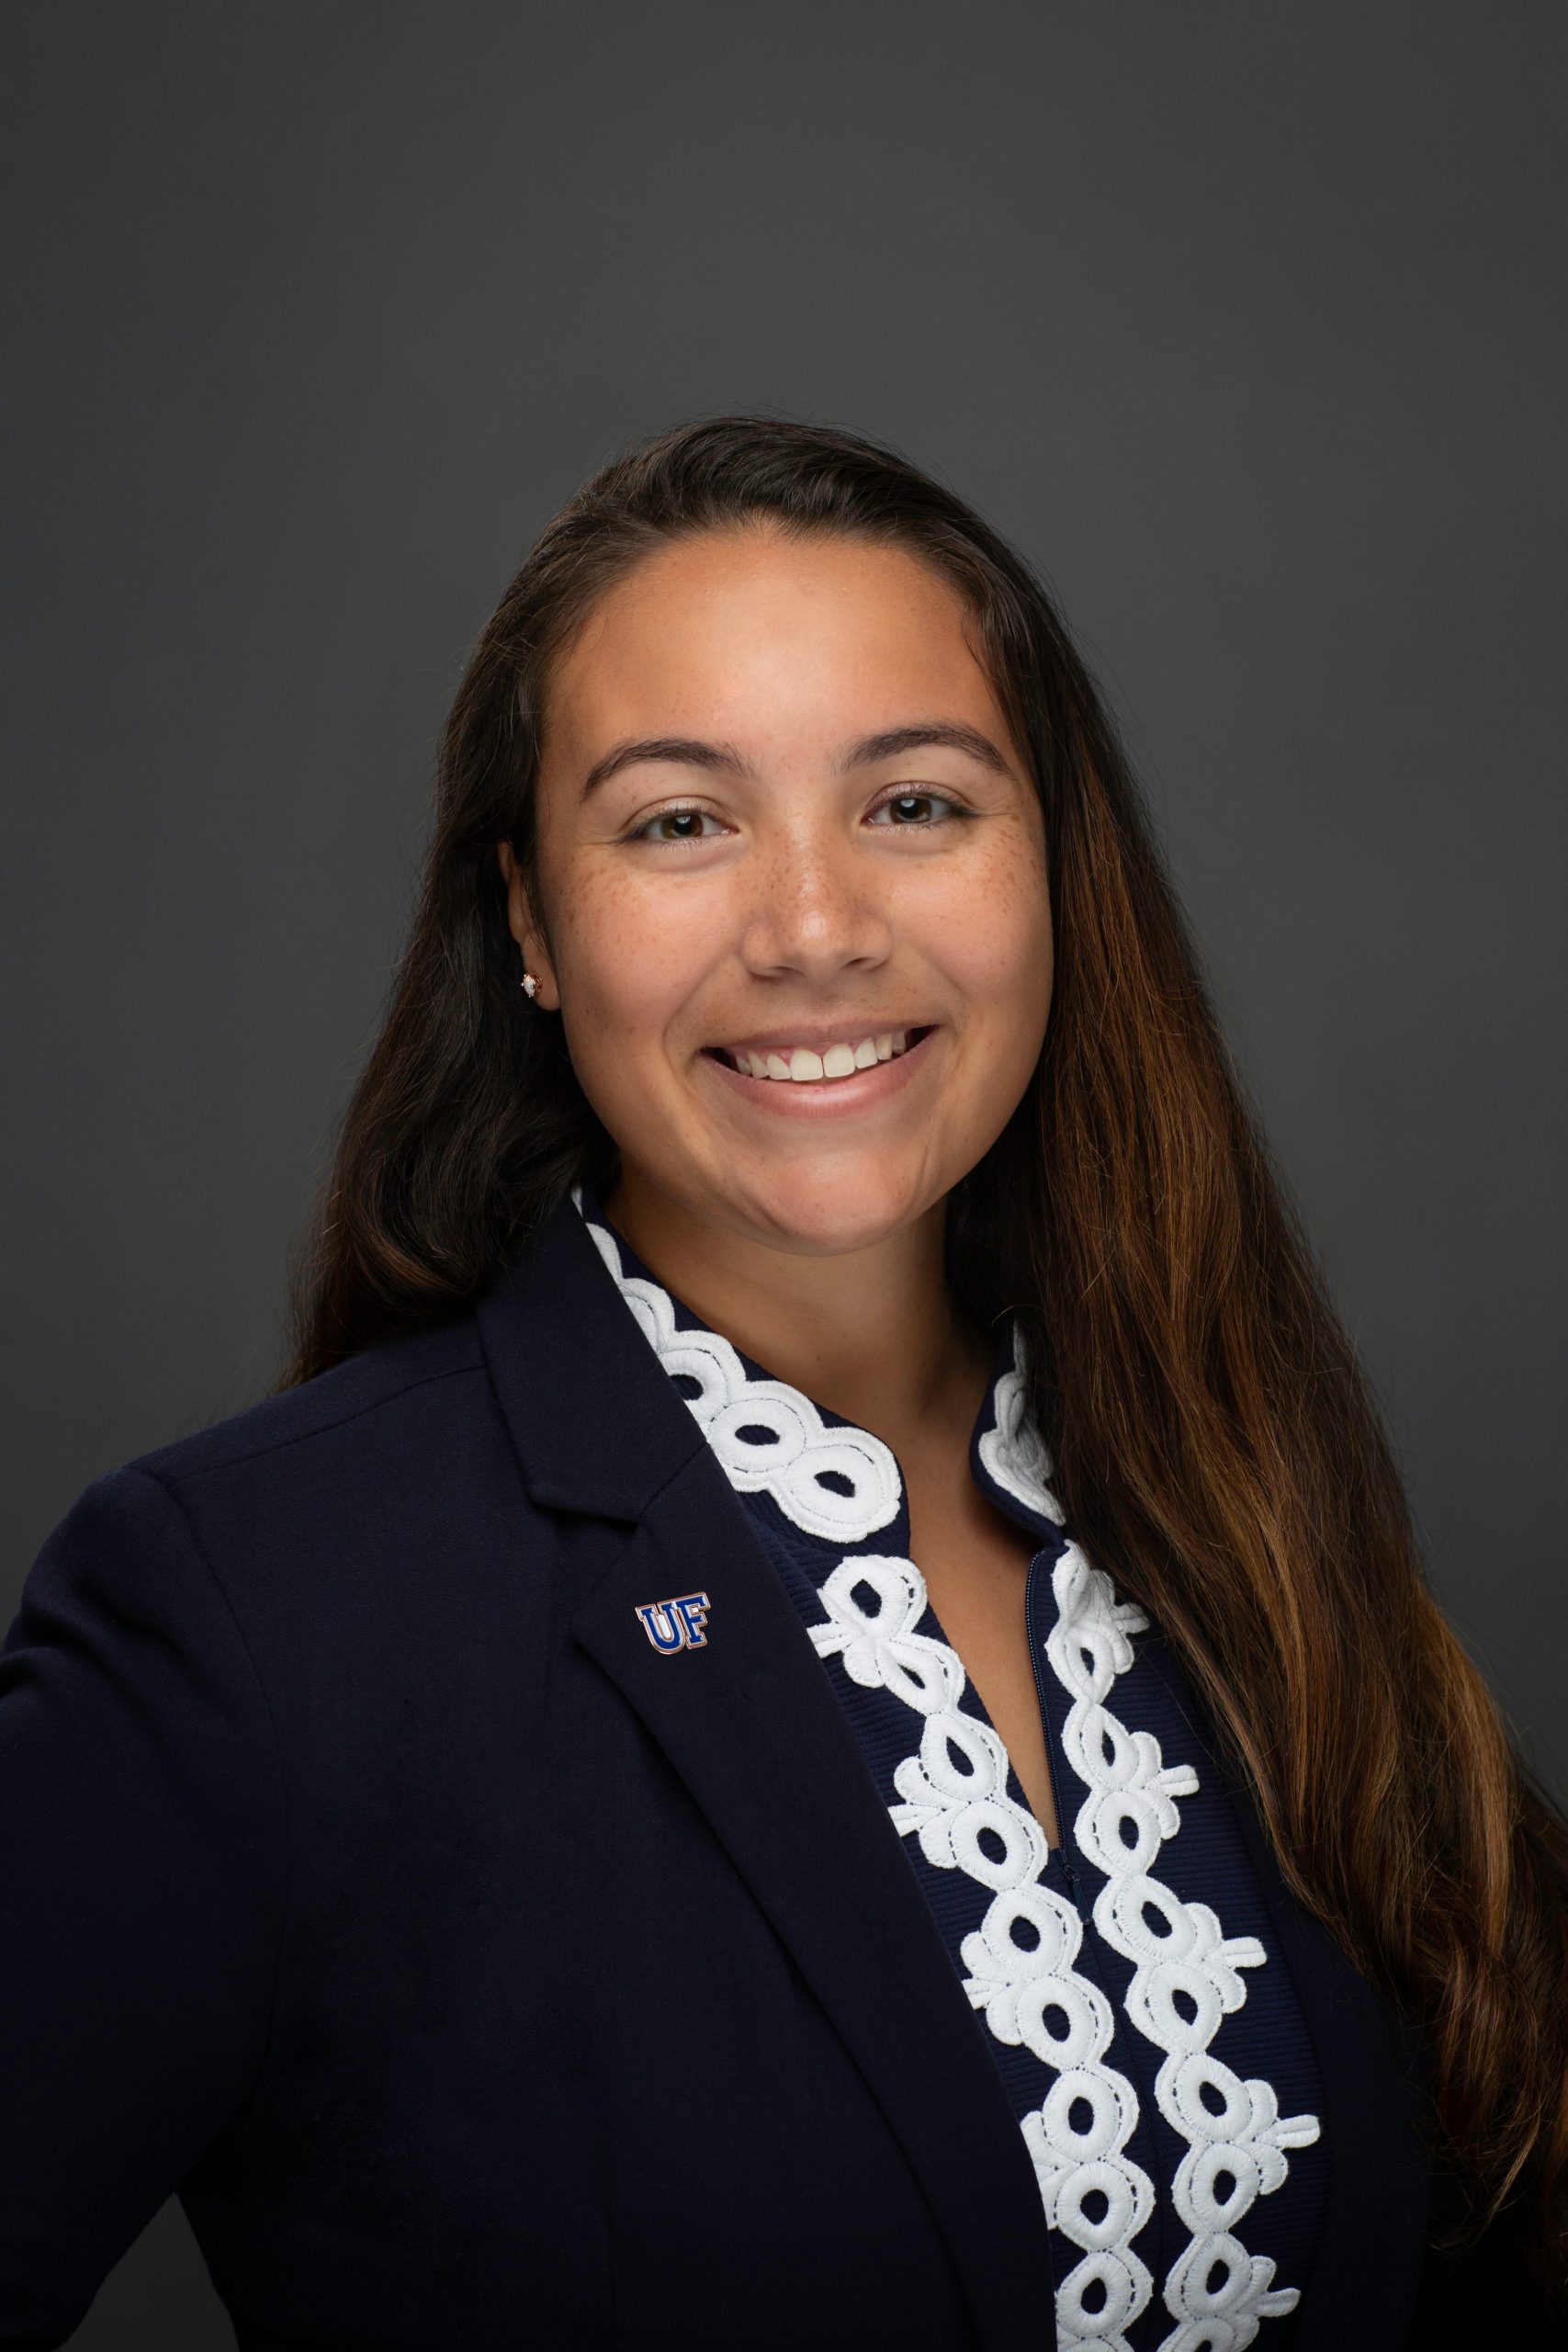 AnaLee Rodriguez, Communications Manager